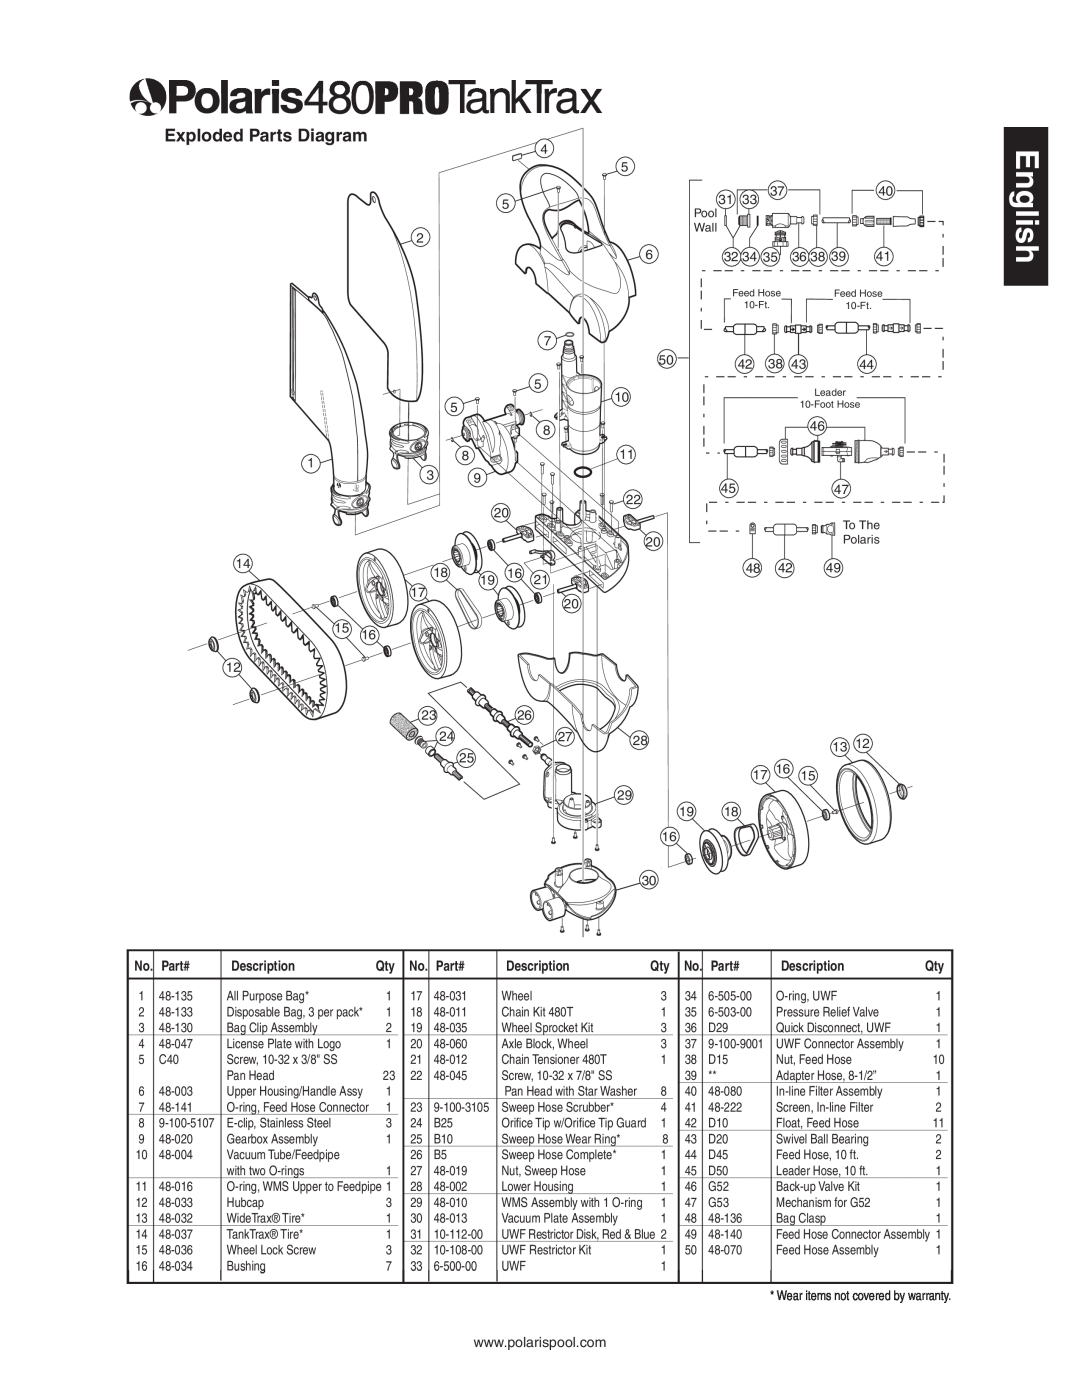 Sony 480 owner manual English, Exploded Parts Diagram, Part#, Description 